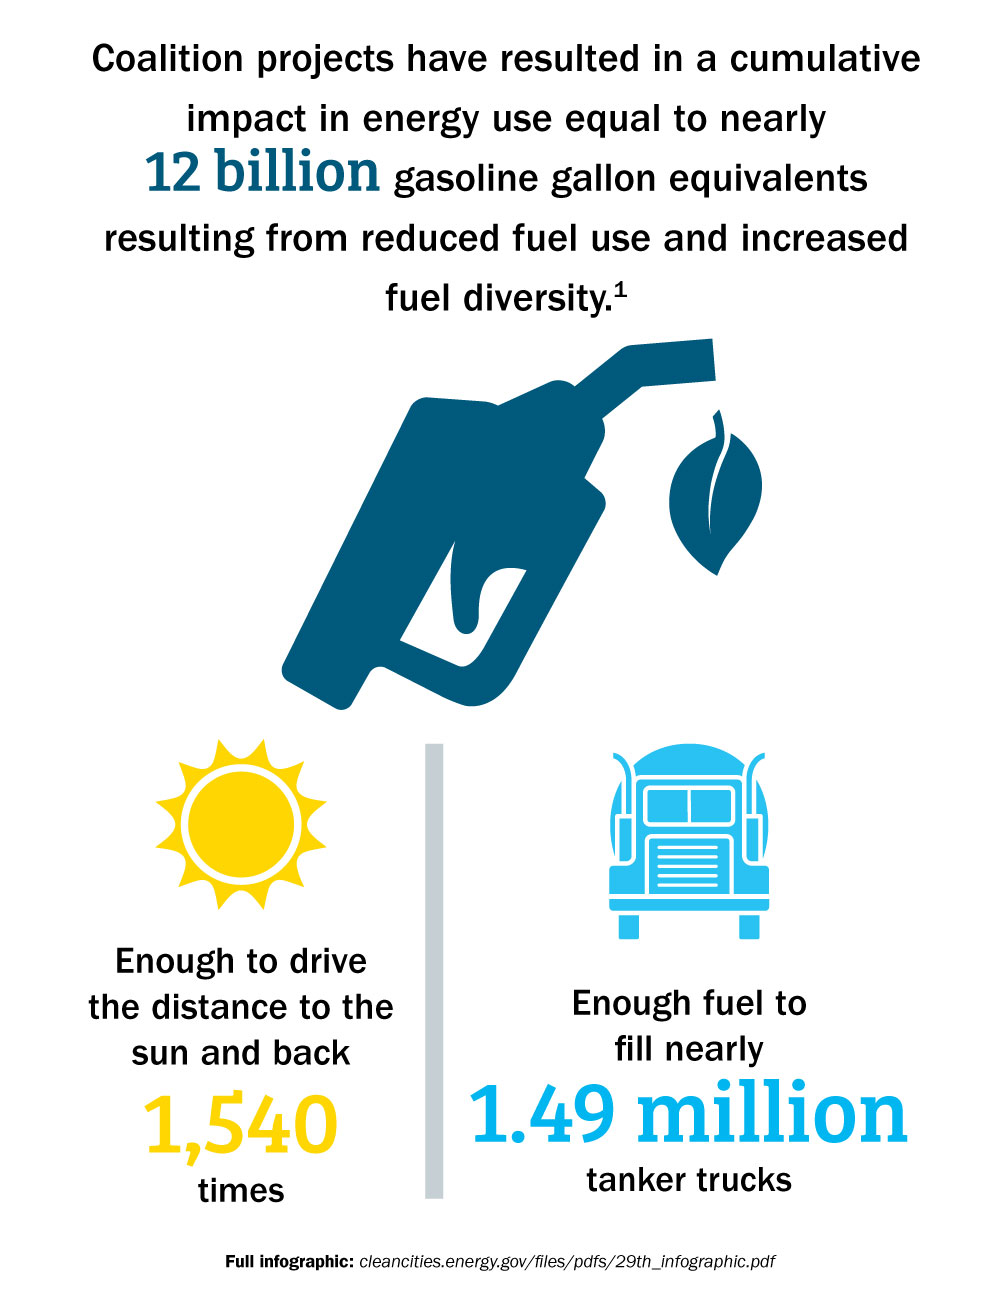 Coalition projects have resulted in a cumulative impact in energy use equal to nearly 12 billion gasoline gallon equivalents resulting from reduced fuel use and increased fuel diversity. Enough to drive the distance to the sun and back 1,540 times. Enough fuel to fill nearly 1.49 million tanker trucks.